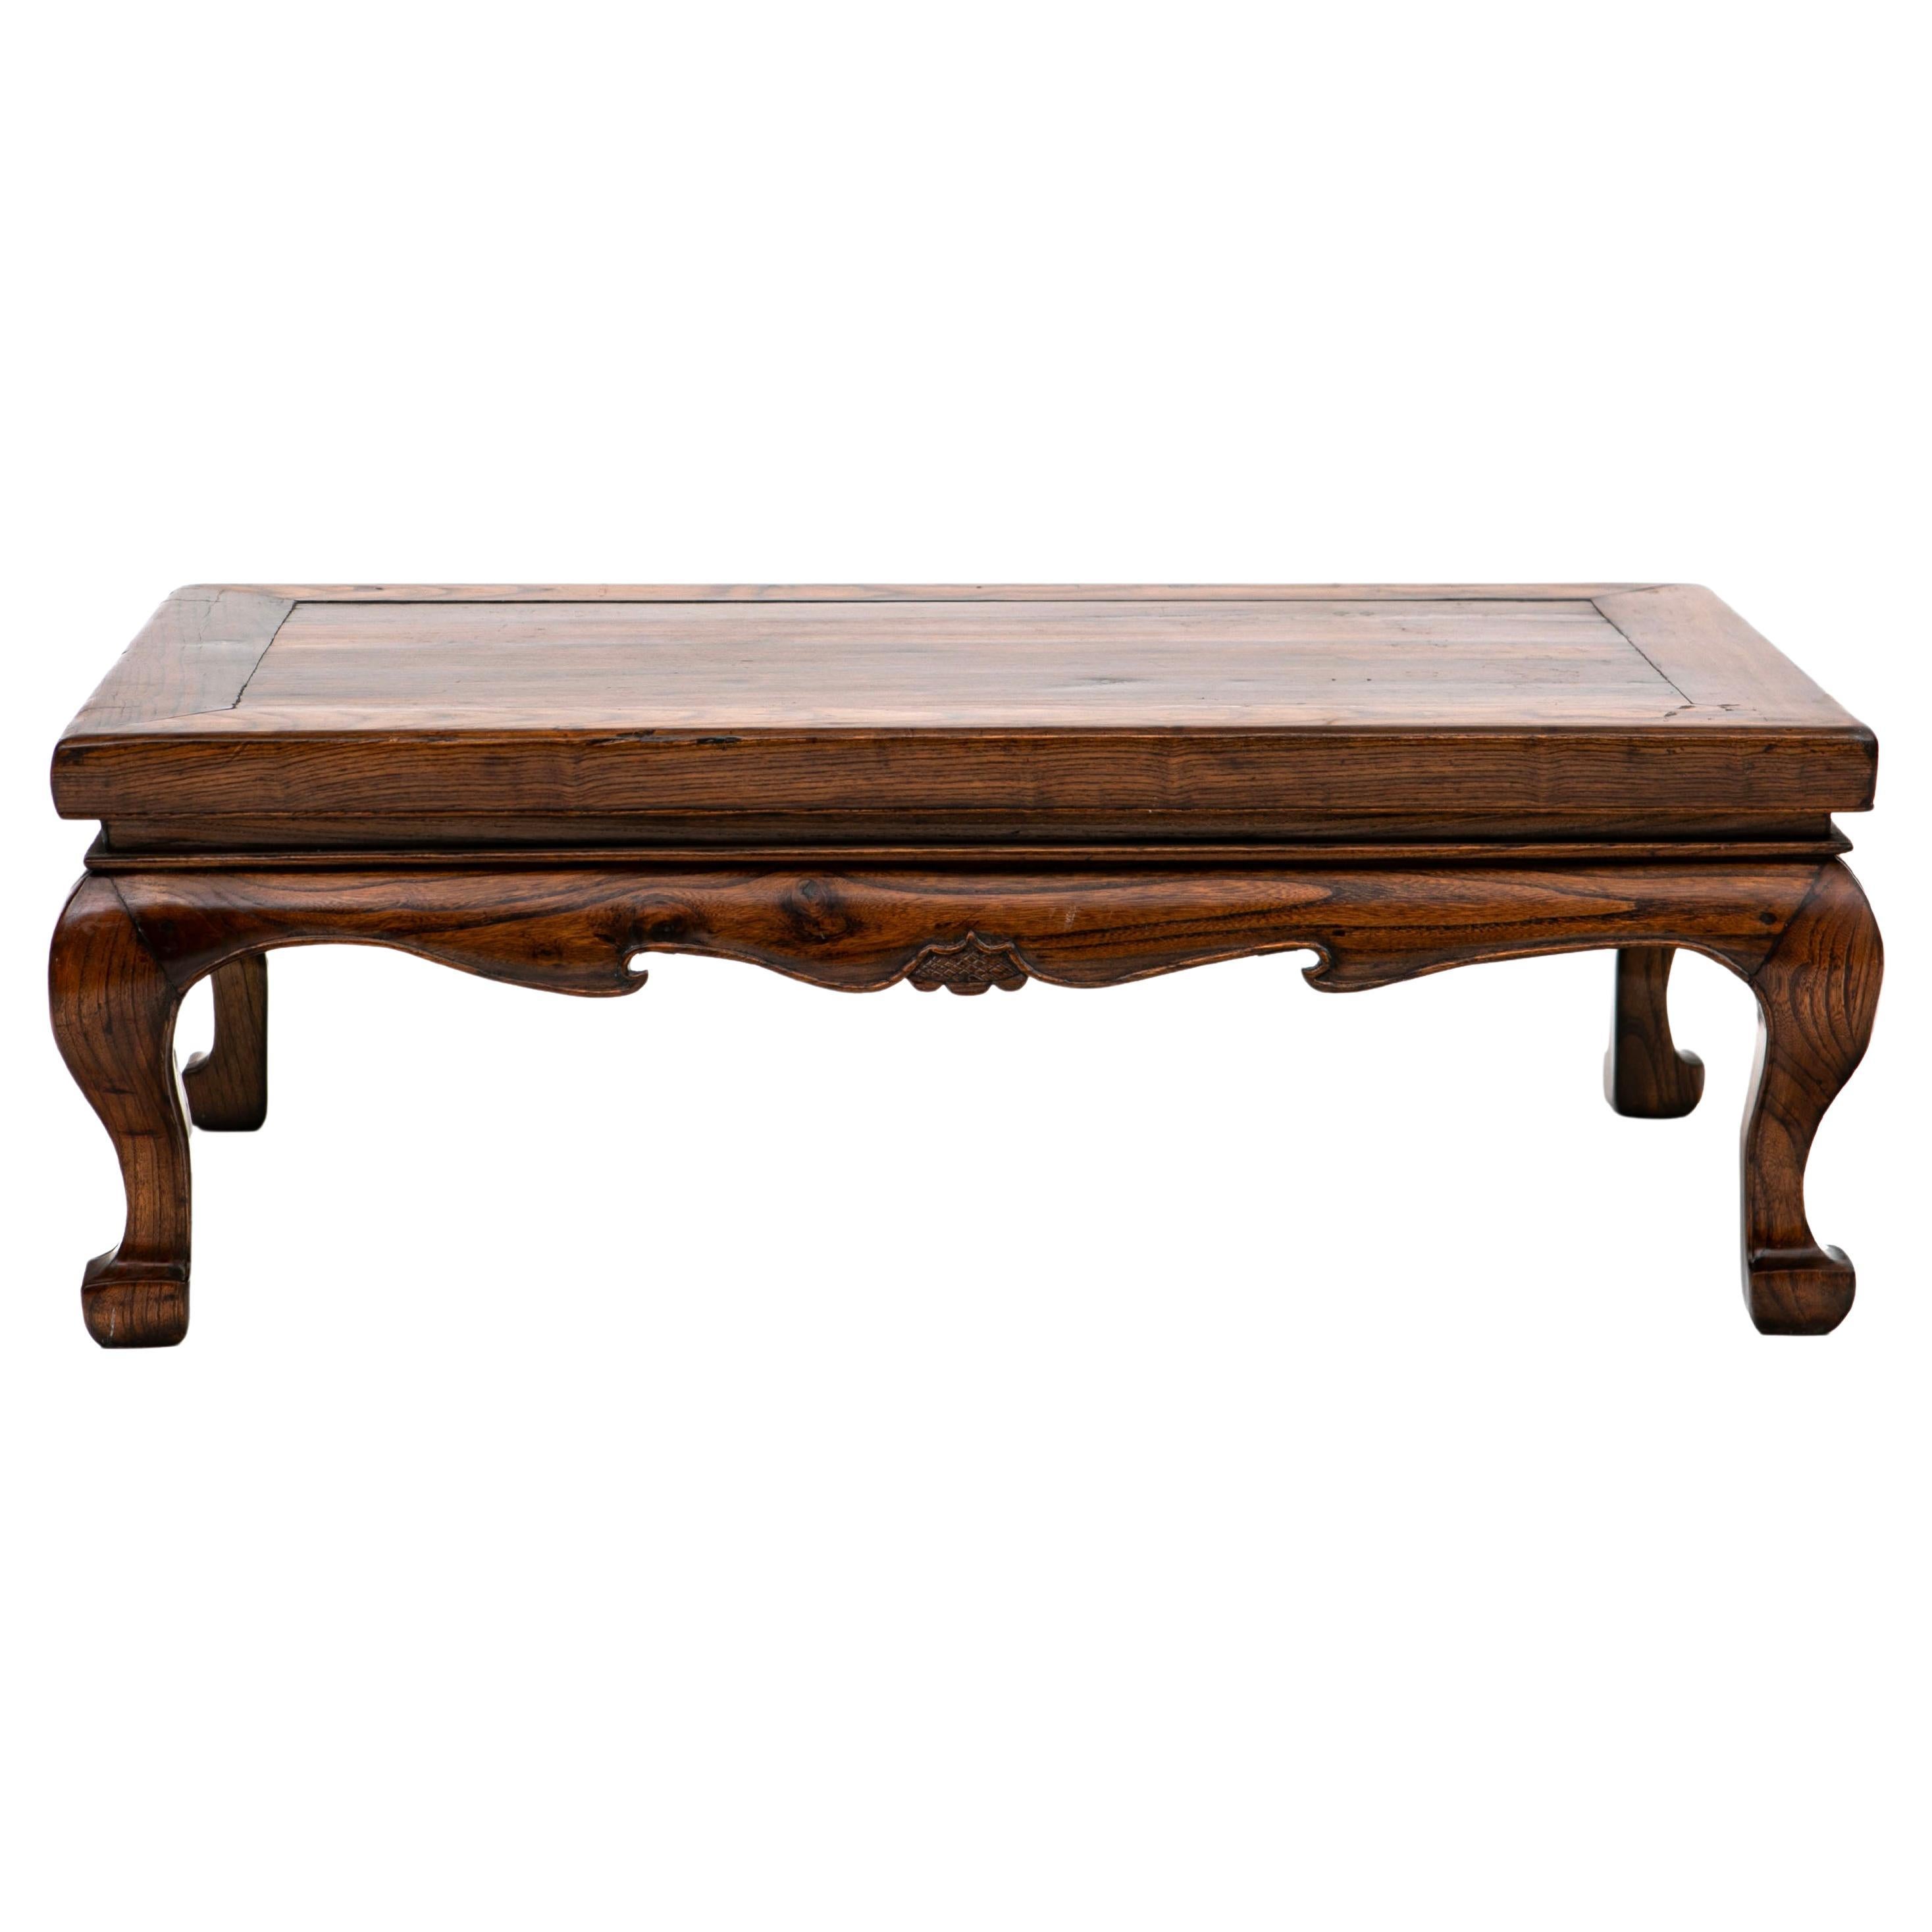 Chinese Mid 19th Century Qing Dynasty Kang / Low Table